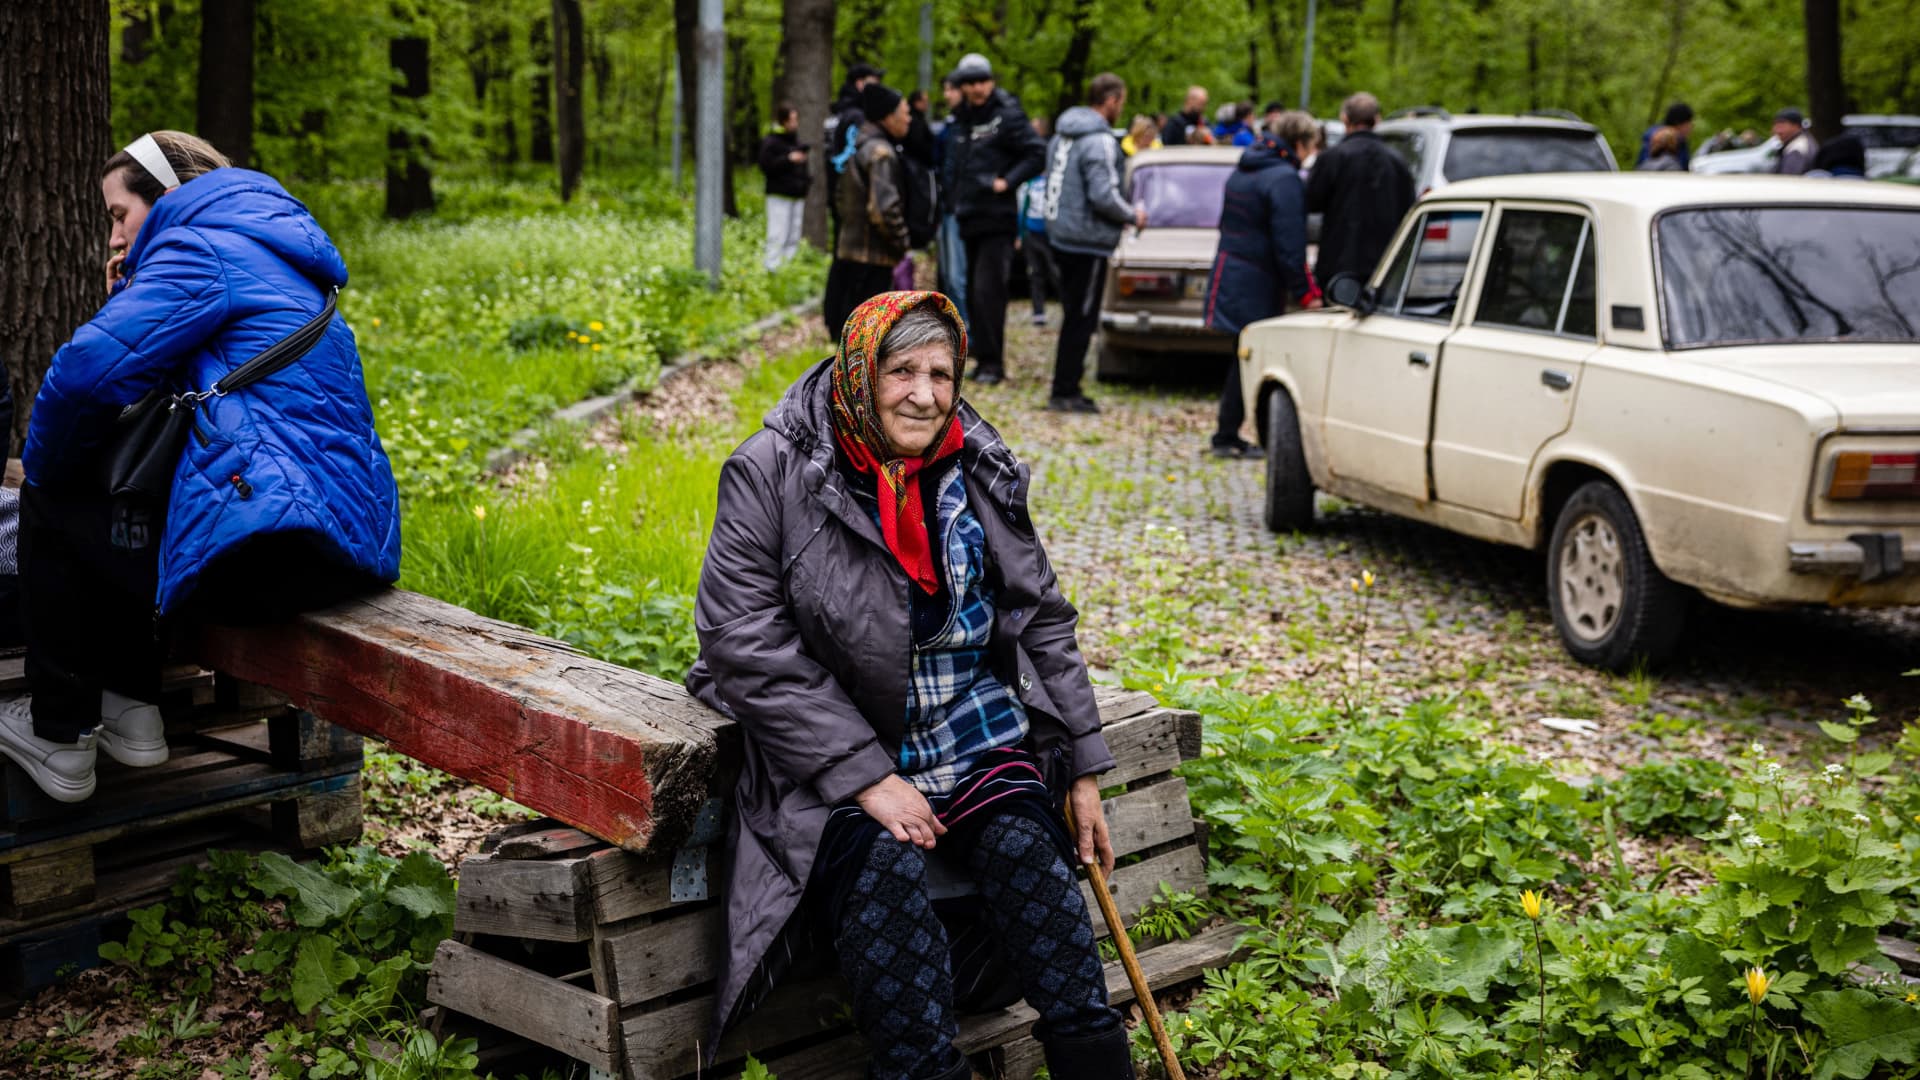 A ederly woman, who fled from the village of Ruska Lozova, rests at the evacuation point in Kharkiv, eastern Ukraine, on April 29, 2022, on the 65th day of the Russian invasion of Ukraine. Several hundred residents of key village Ruska Lozova arrived in Kharkiv on April 29, 2022 morning, after being evacuated from this village taken over overnight by the Ukrainian army, after having been under Russian control for two months.